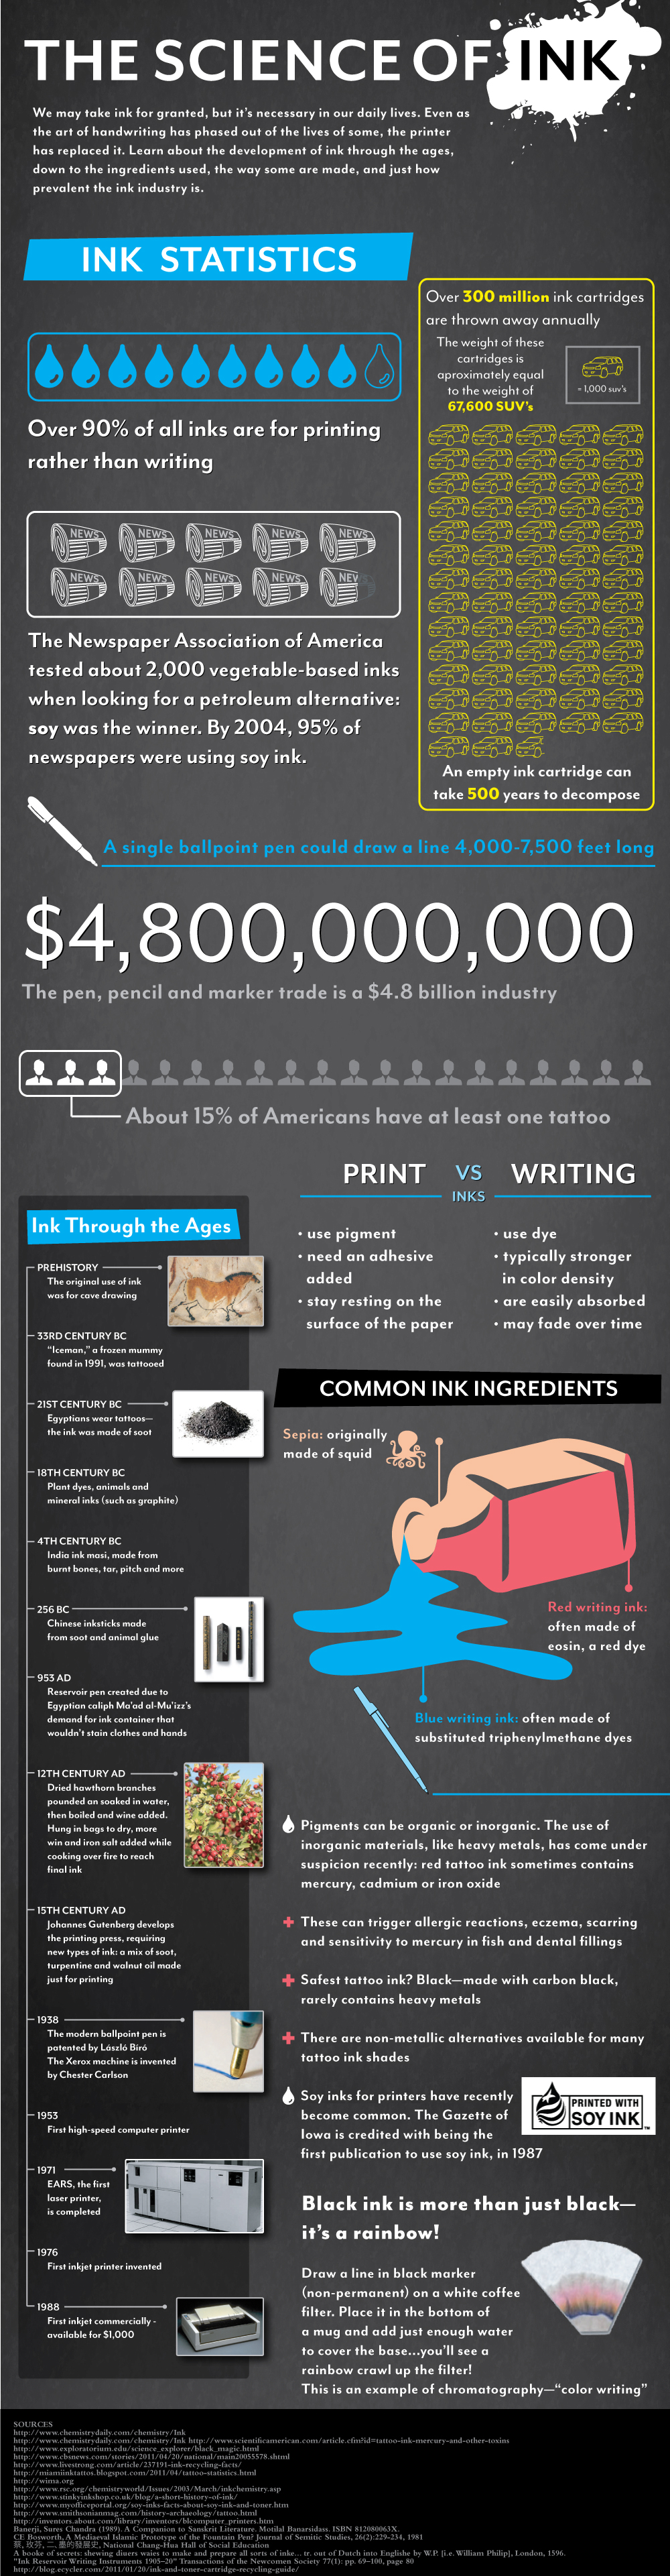 The Science of Ink